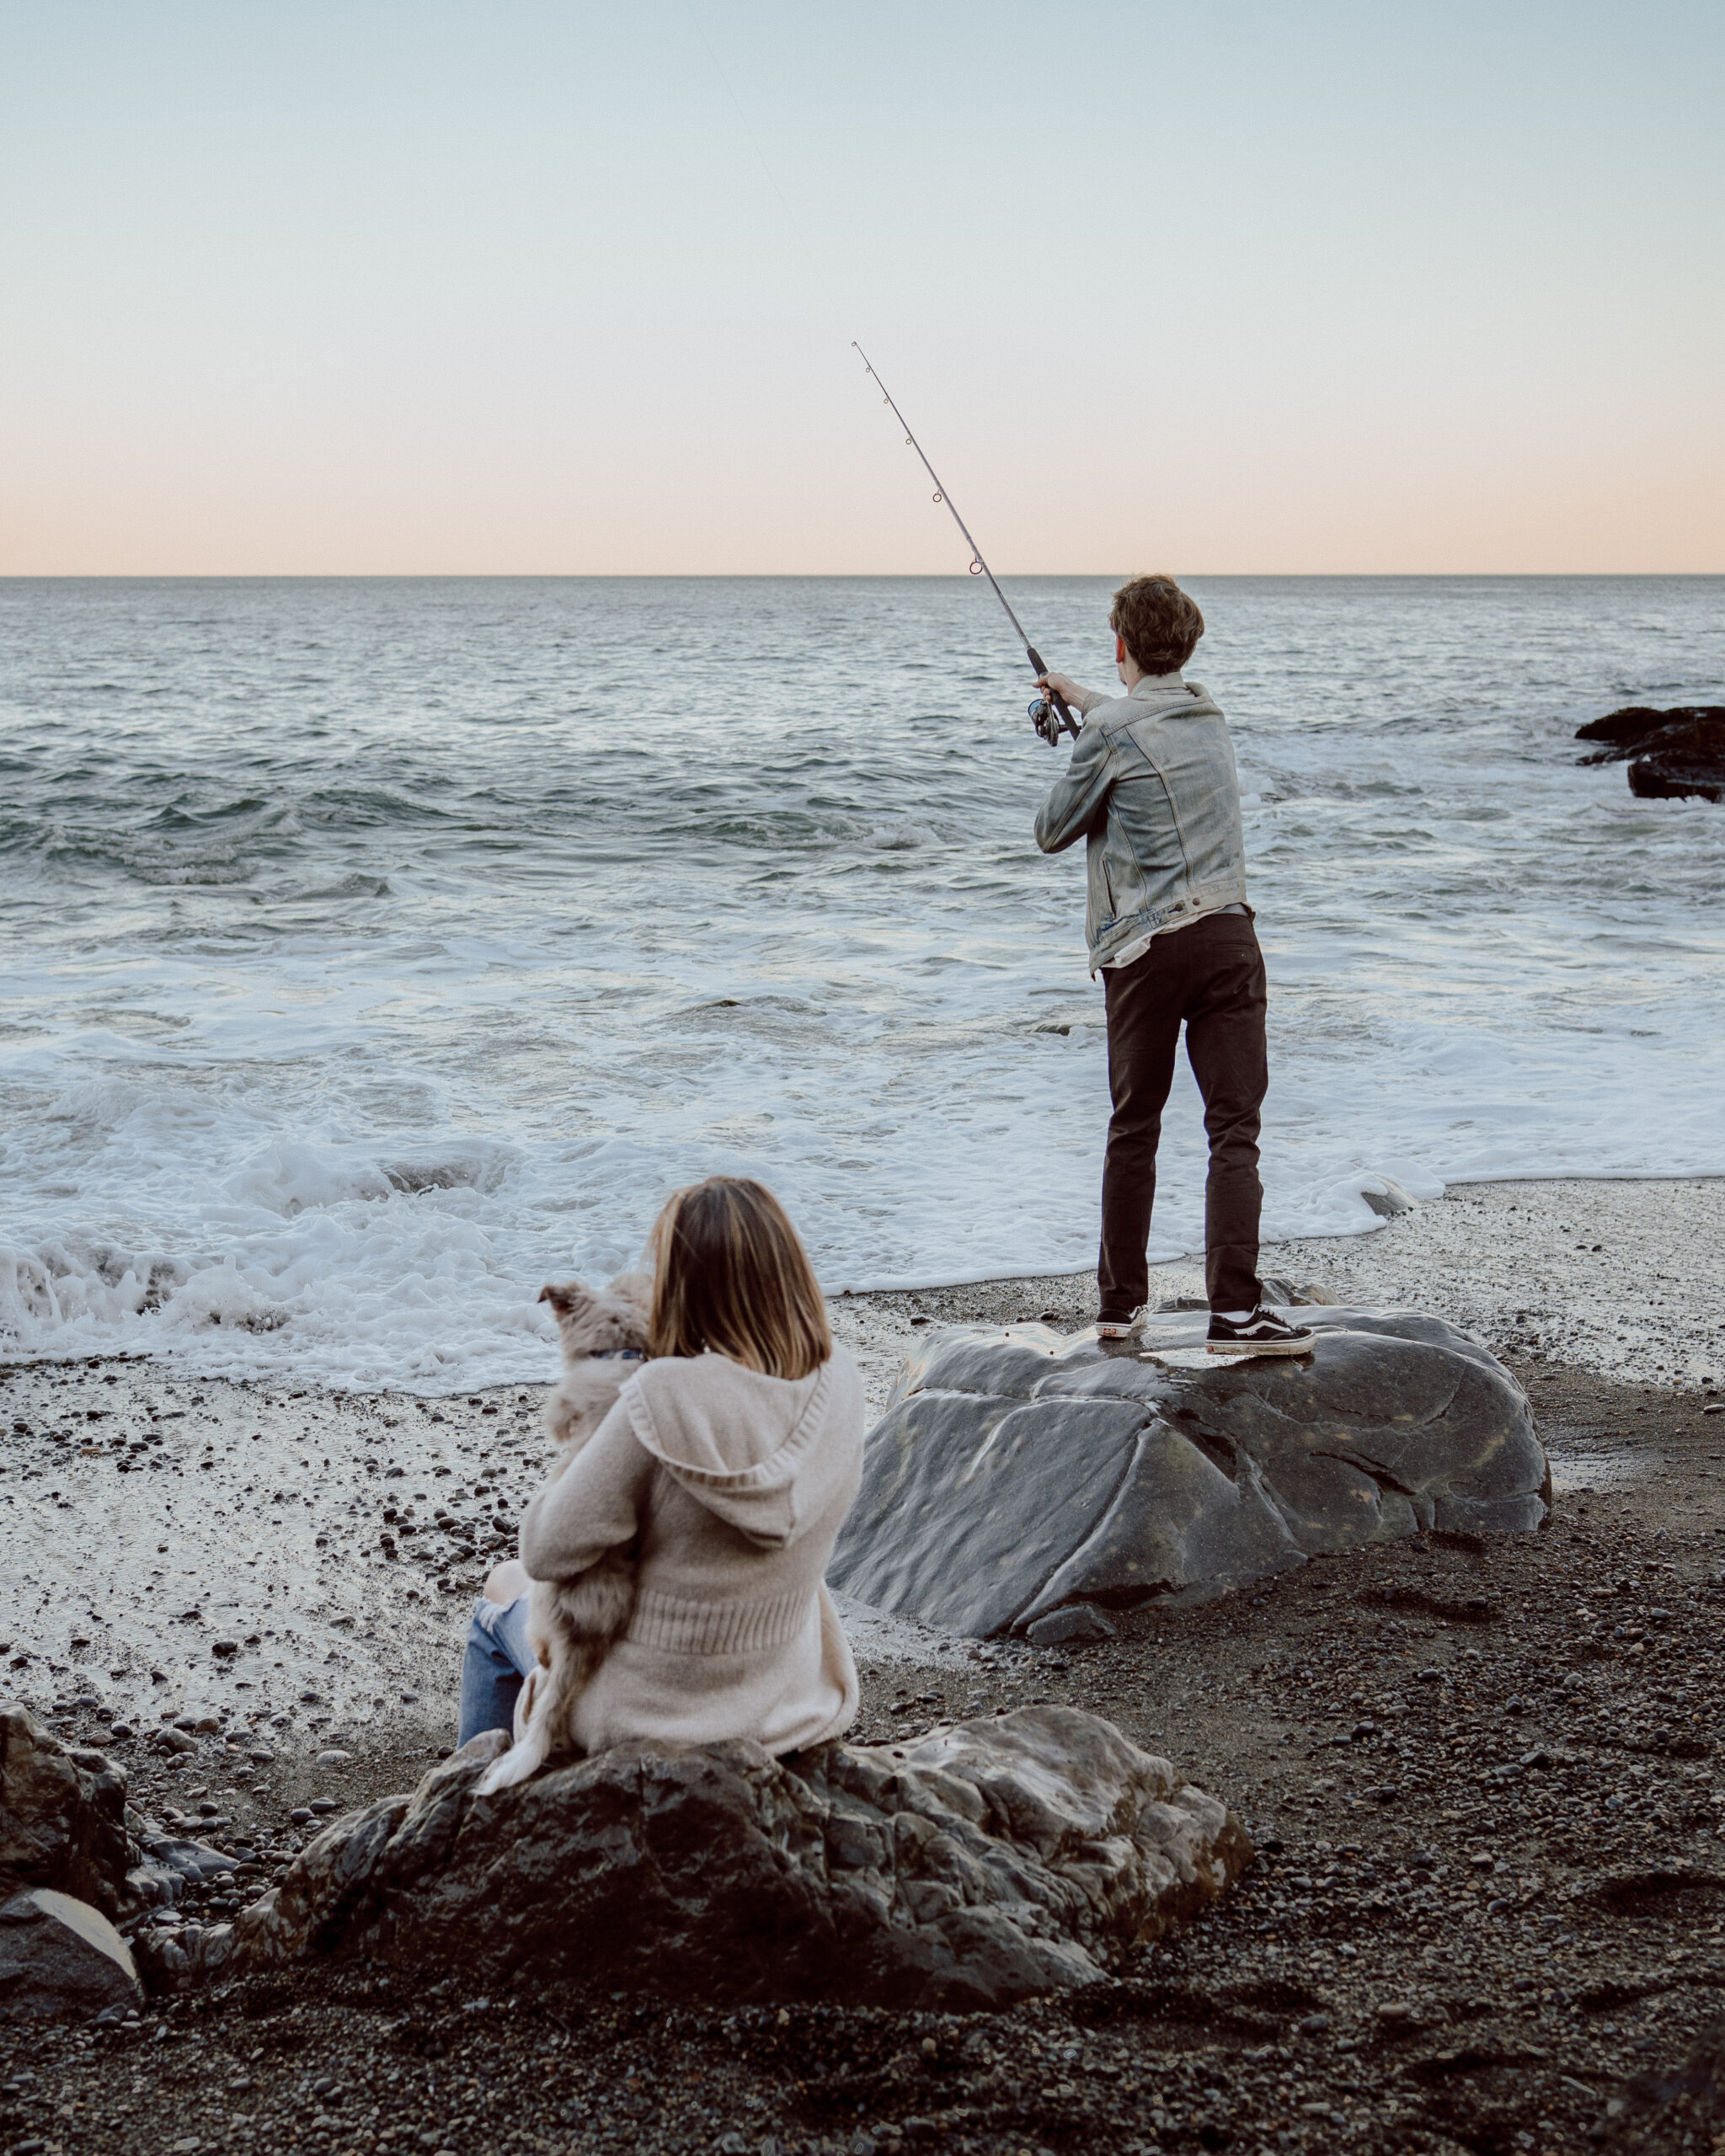 Engagement photo session at Castle Rock, Marblehead, MA: Fiancé fishes in the ocean while fiancée and their dog enjoy watching, capturing a relaxed moment by the coast.